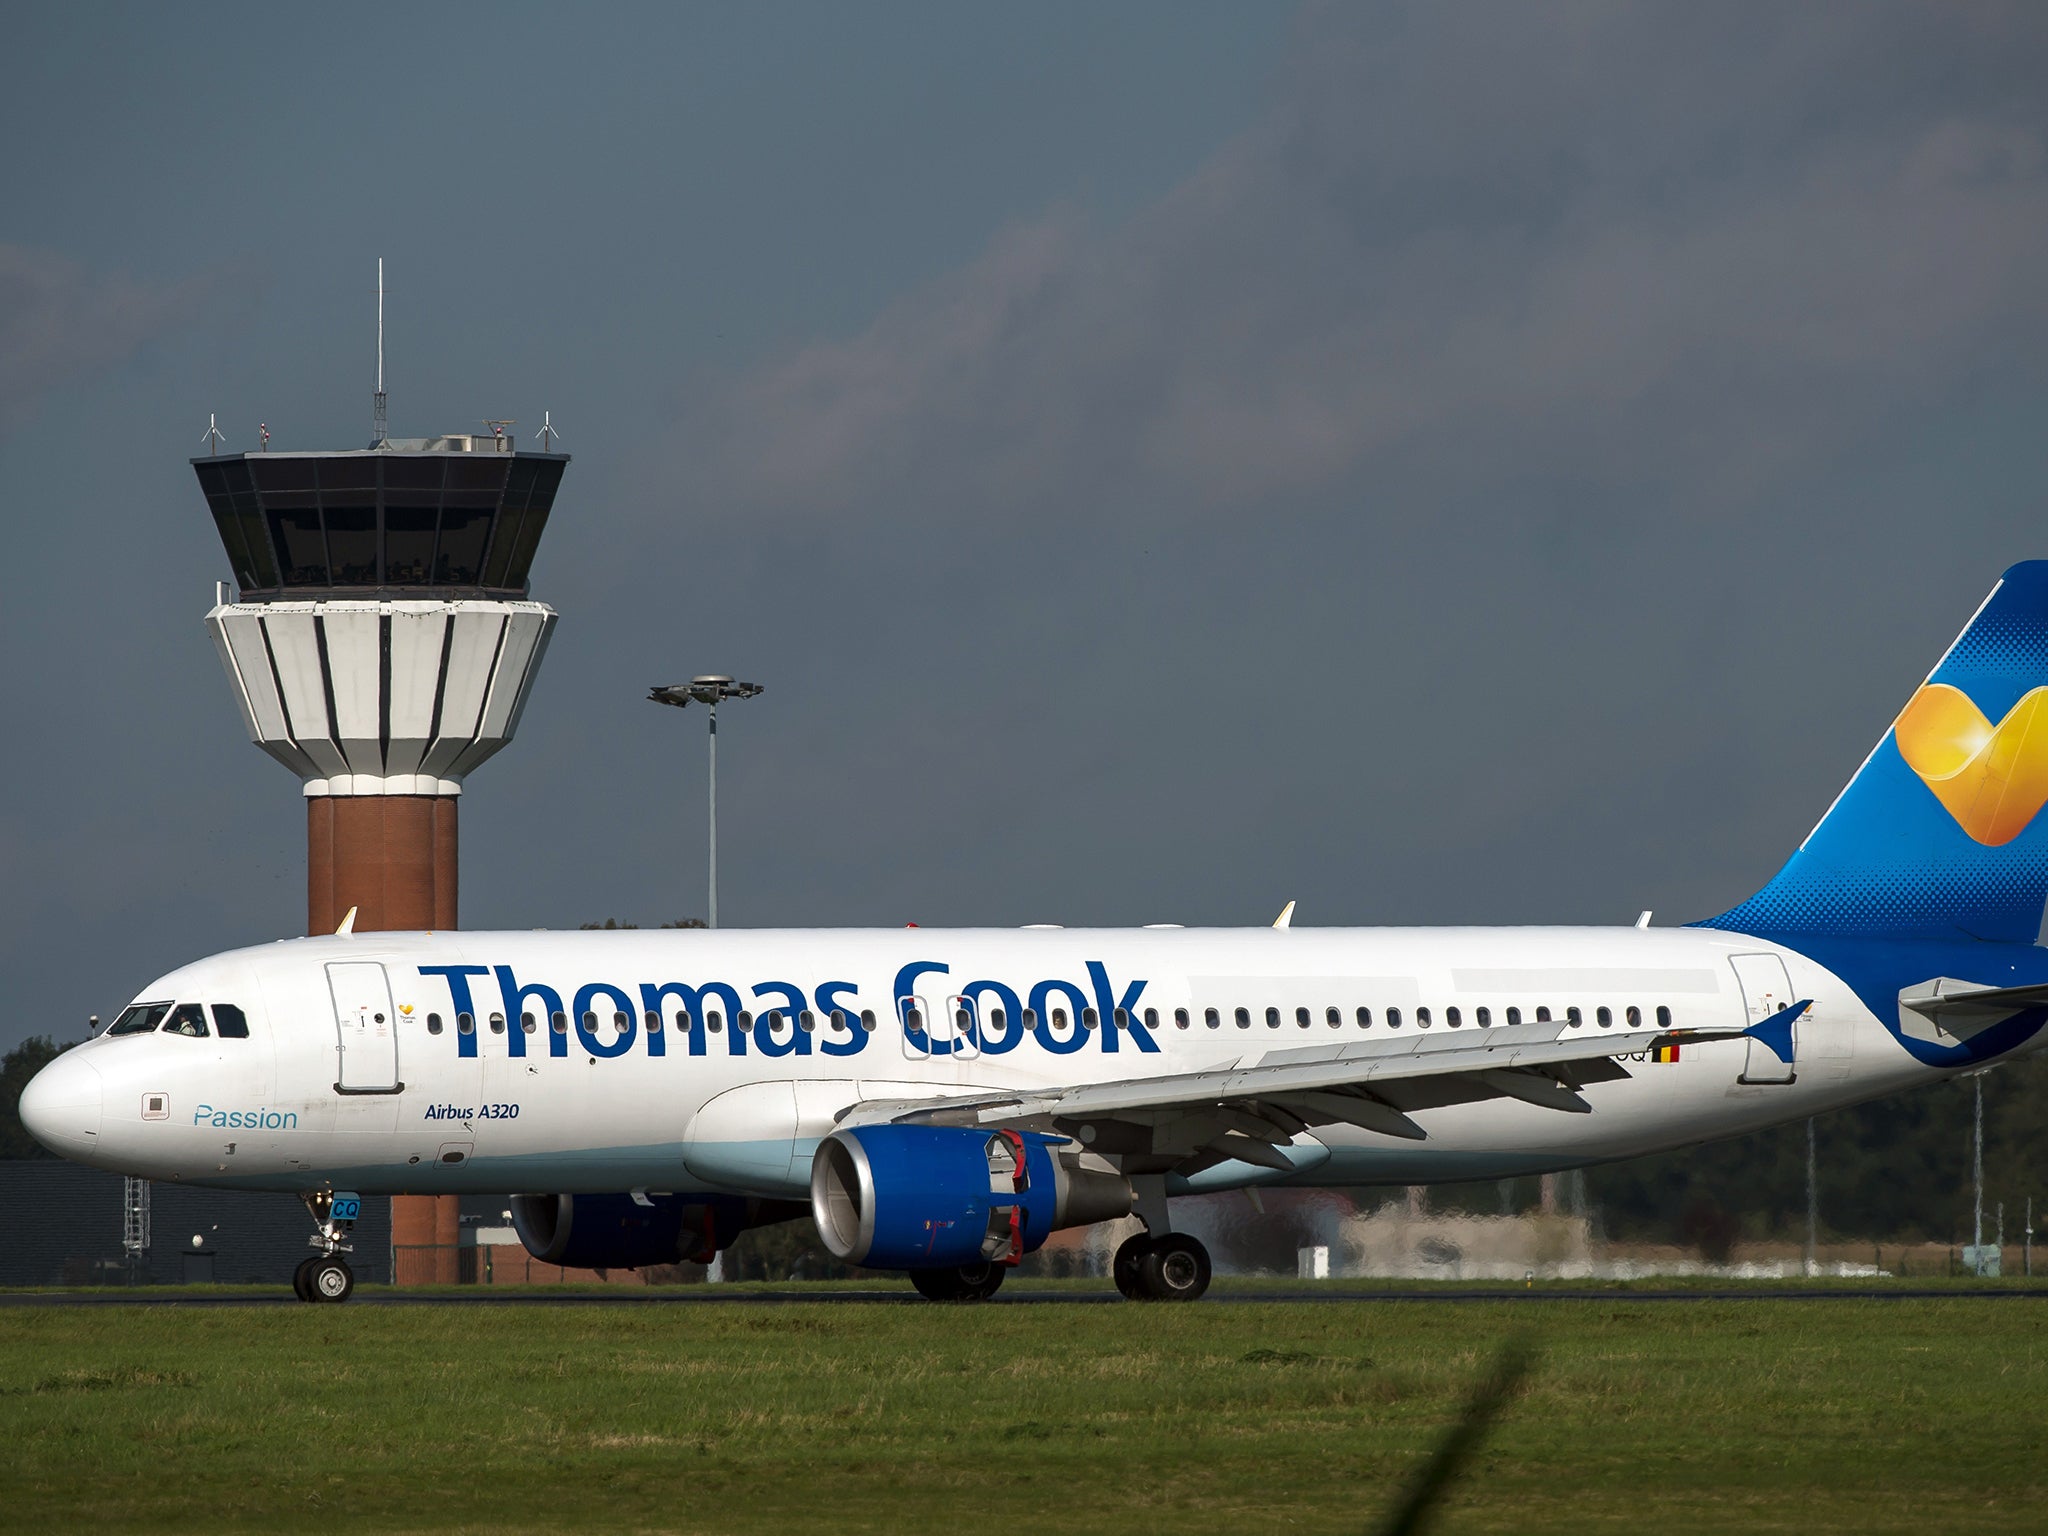 Thomas Cook faces a walkout of over 1,000 walkout over 20 minute breaks